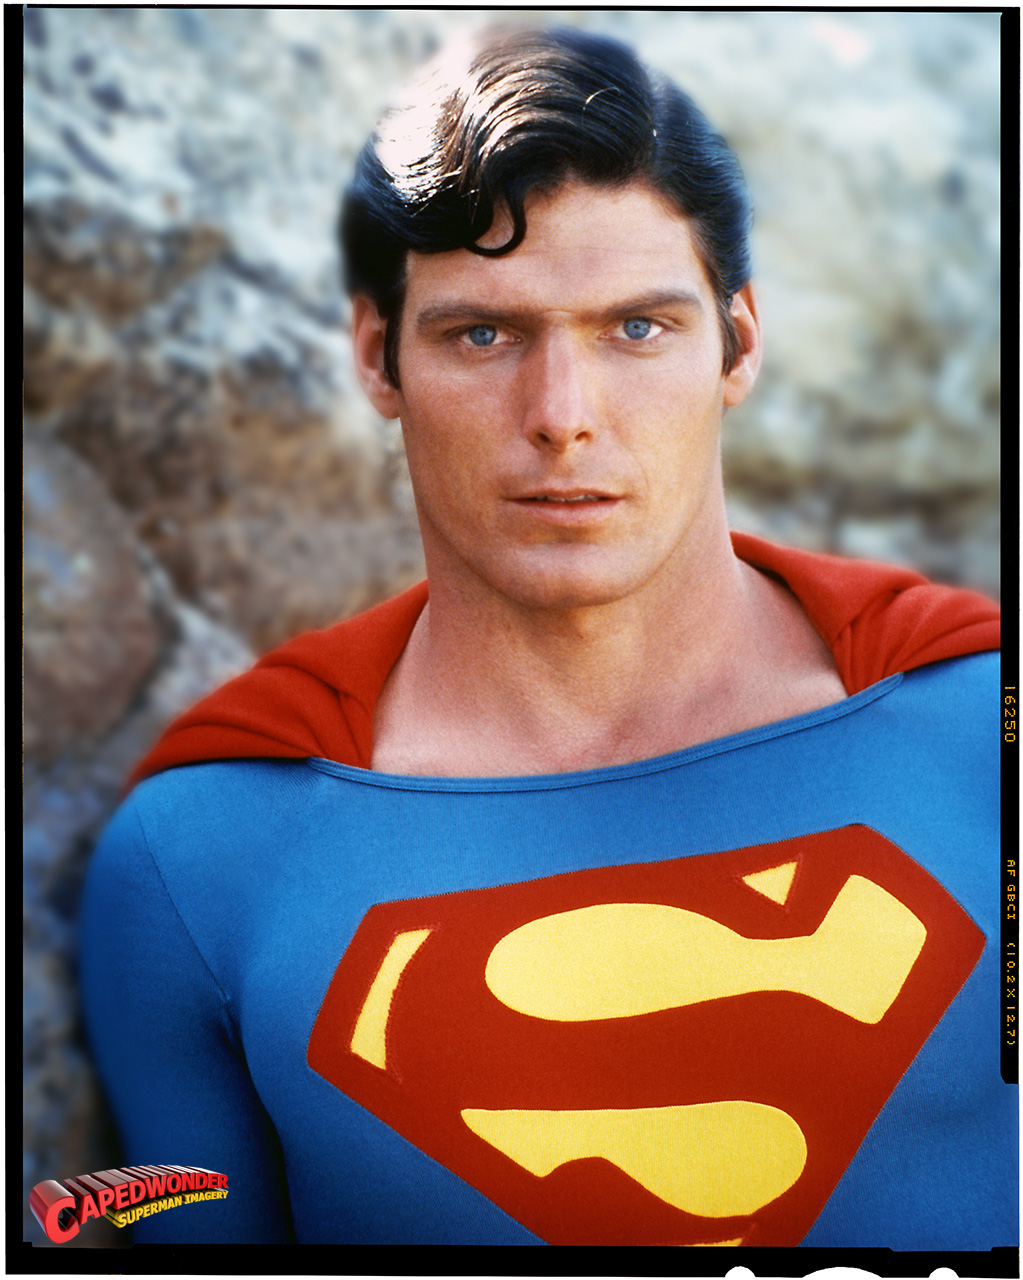 Superman by Gary, a perfect likeness with Christopher Reeves. - rocklean2